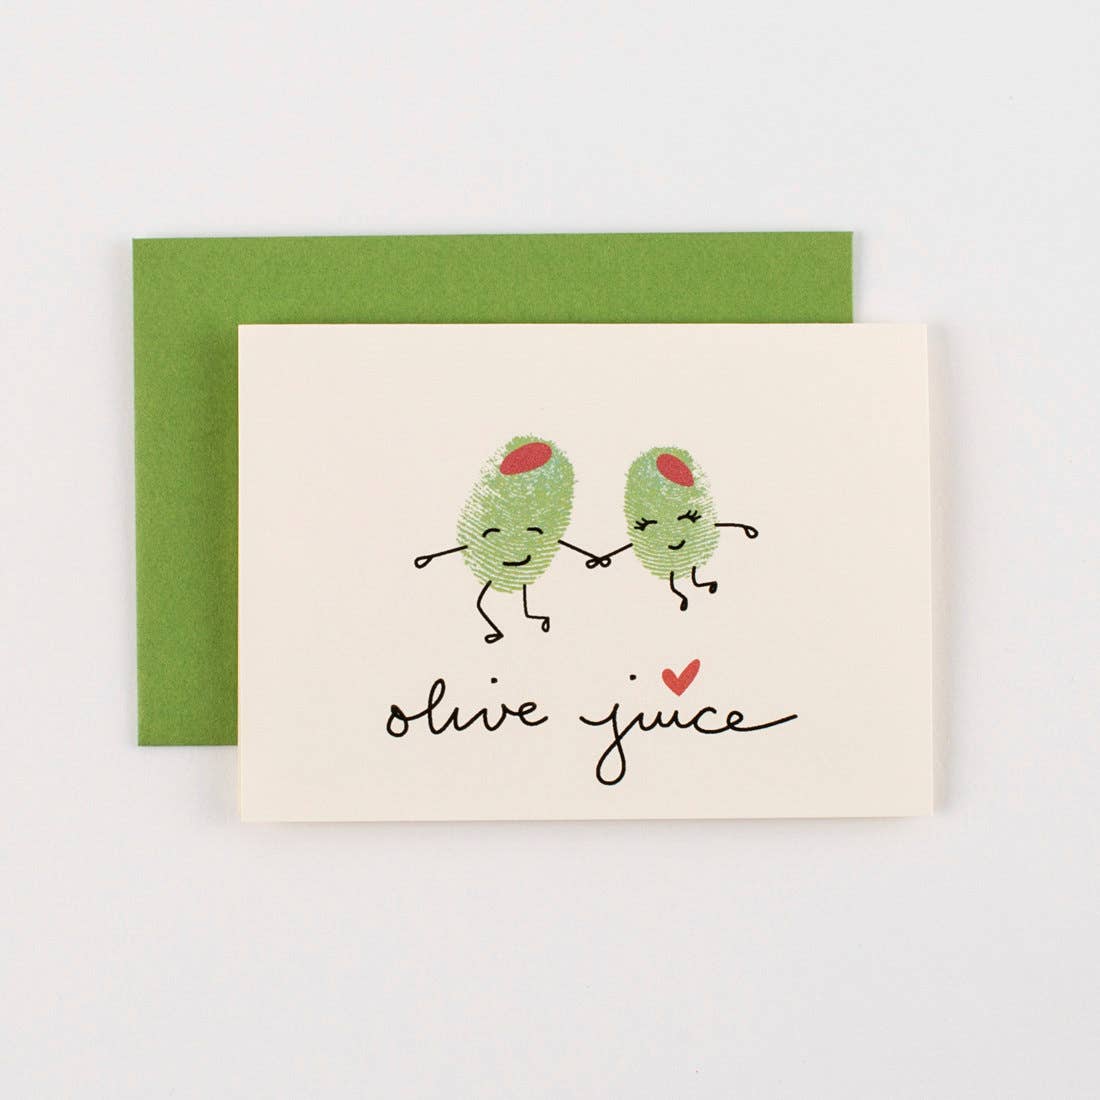 Olive greeting card -- image is two green olives holding hands and below them it reads "olive juice"